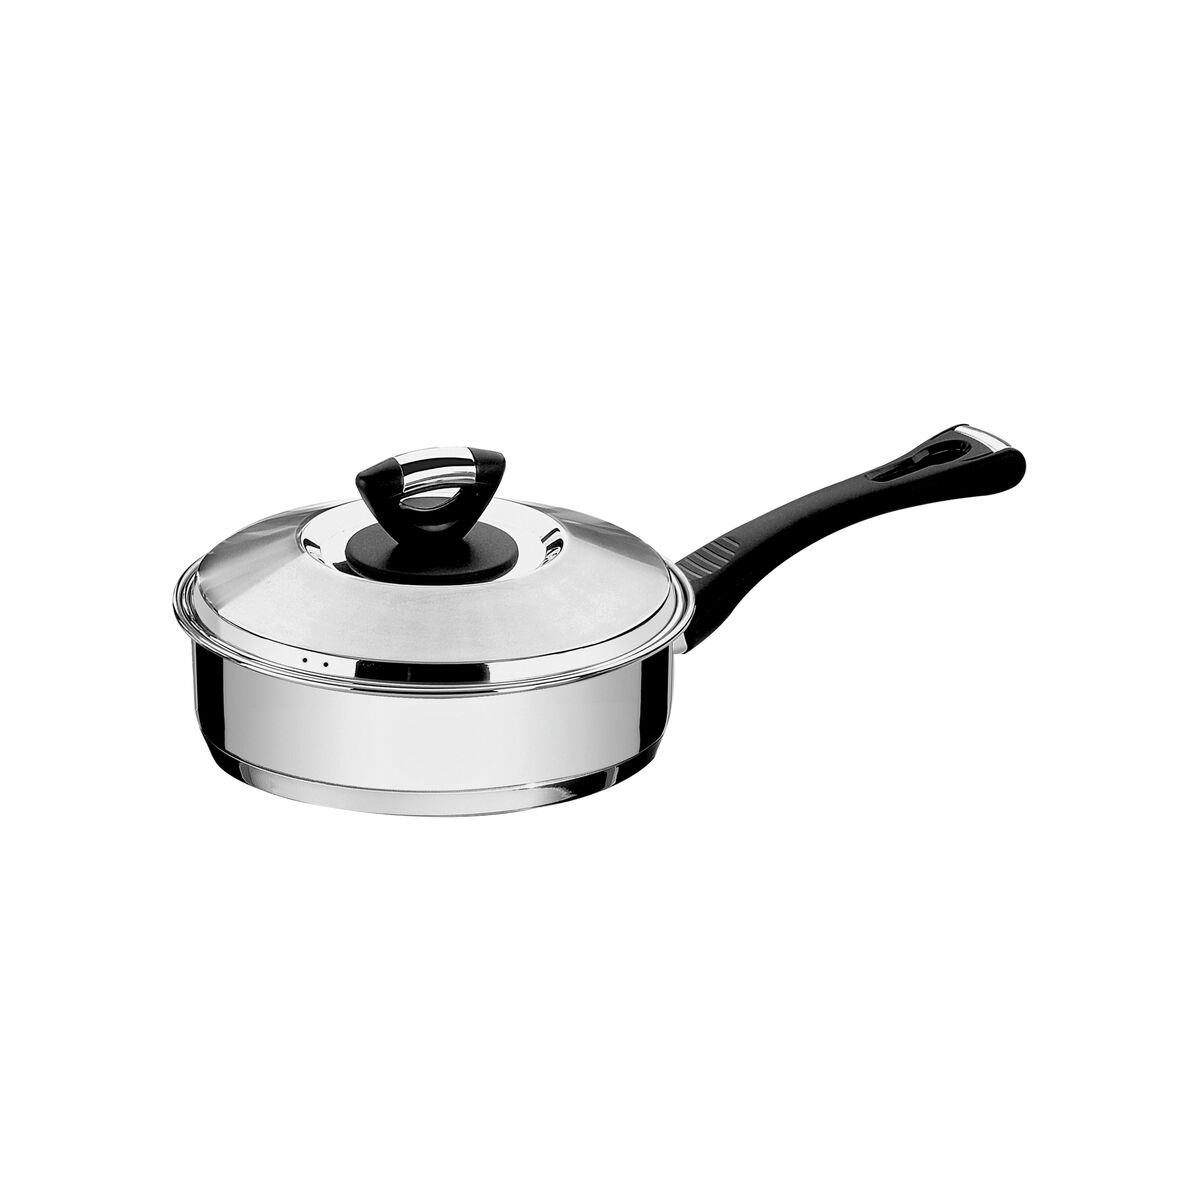 Tramontina Solar Bakelite stainless steel frying pan with lid, long handle and tri-ply base, 20 cm 2.1 L